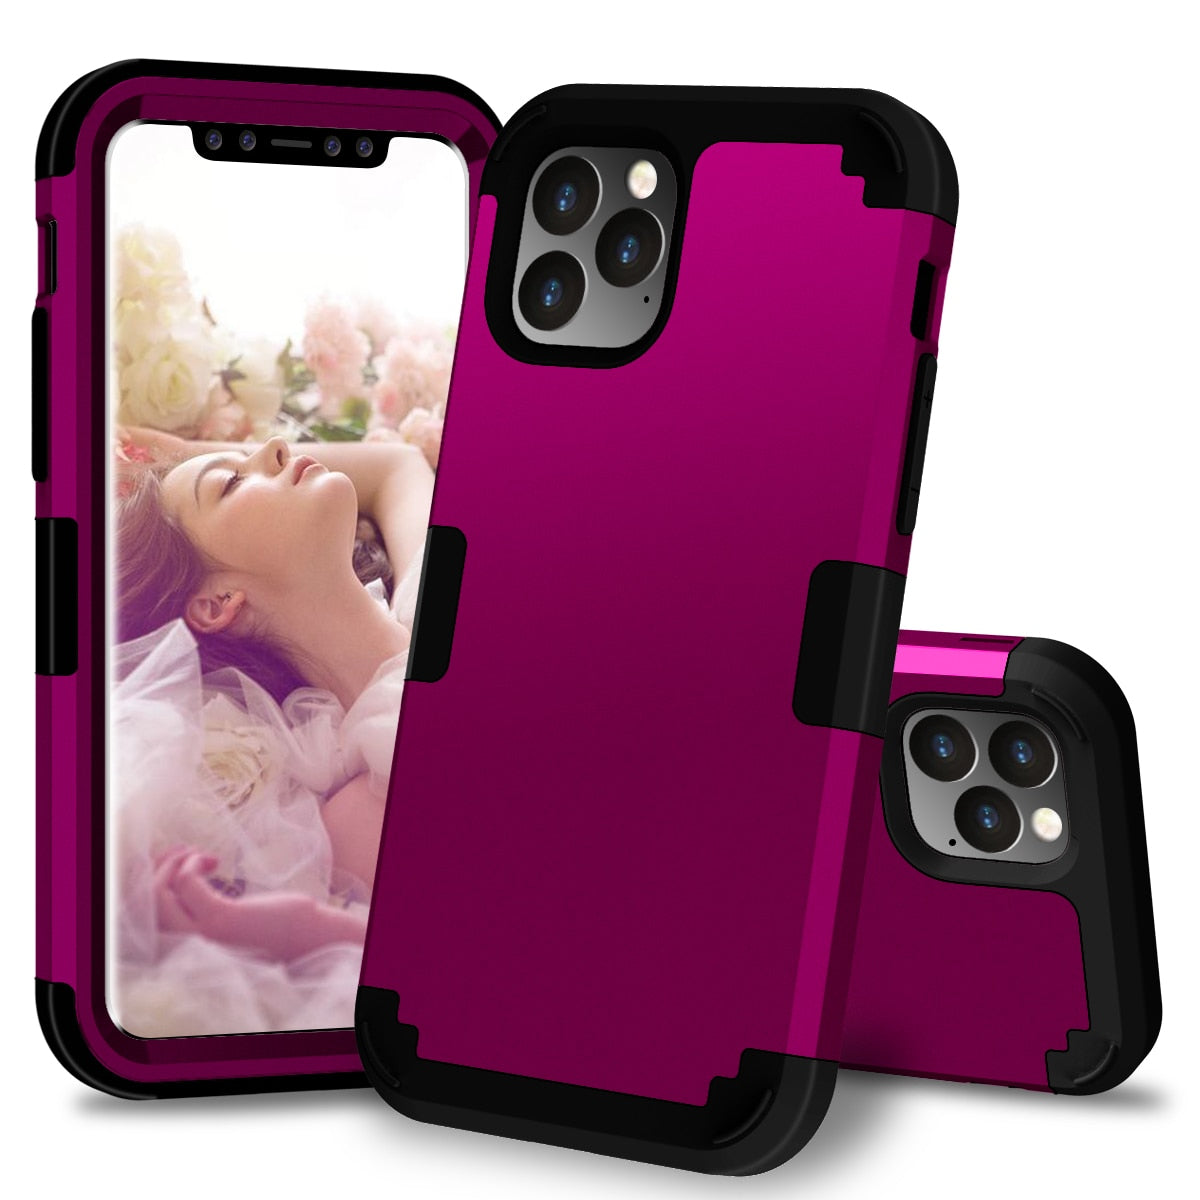 For Apple iPhone 11 2019 Case Shockproof Protect Hybrid Hard Rubber Impact Armor Phone Cases For iPhone 11 2019 Cover - 380230 for iPhone X XS / Lavender / United States Find Epic Store